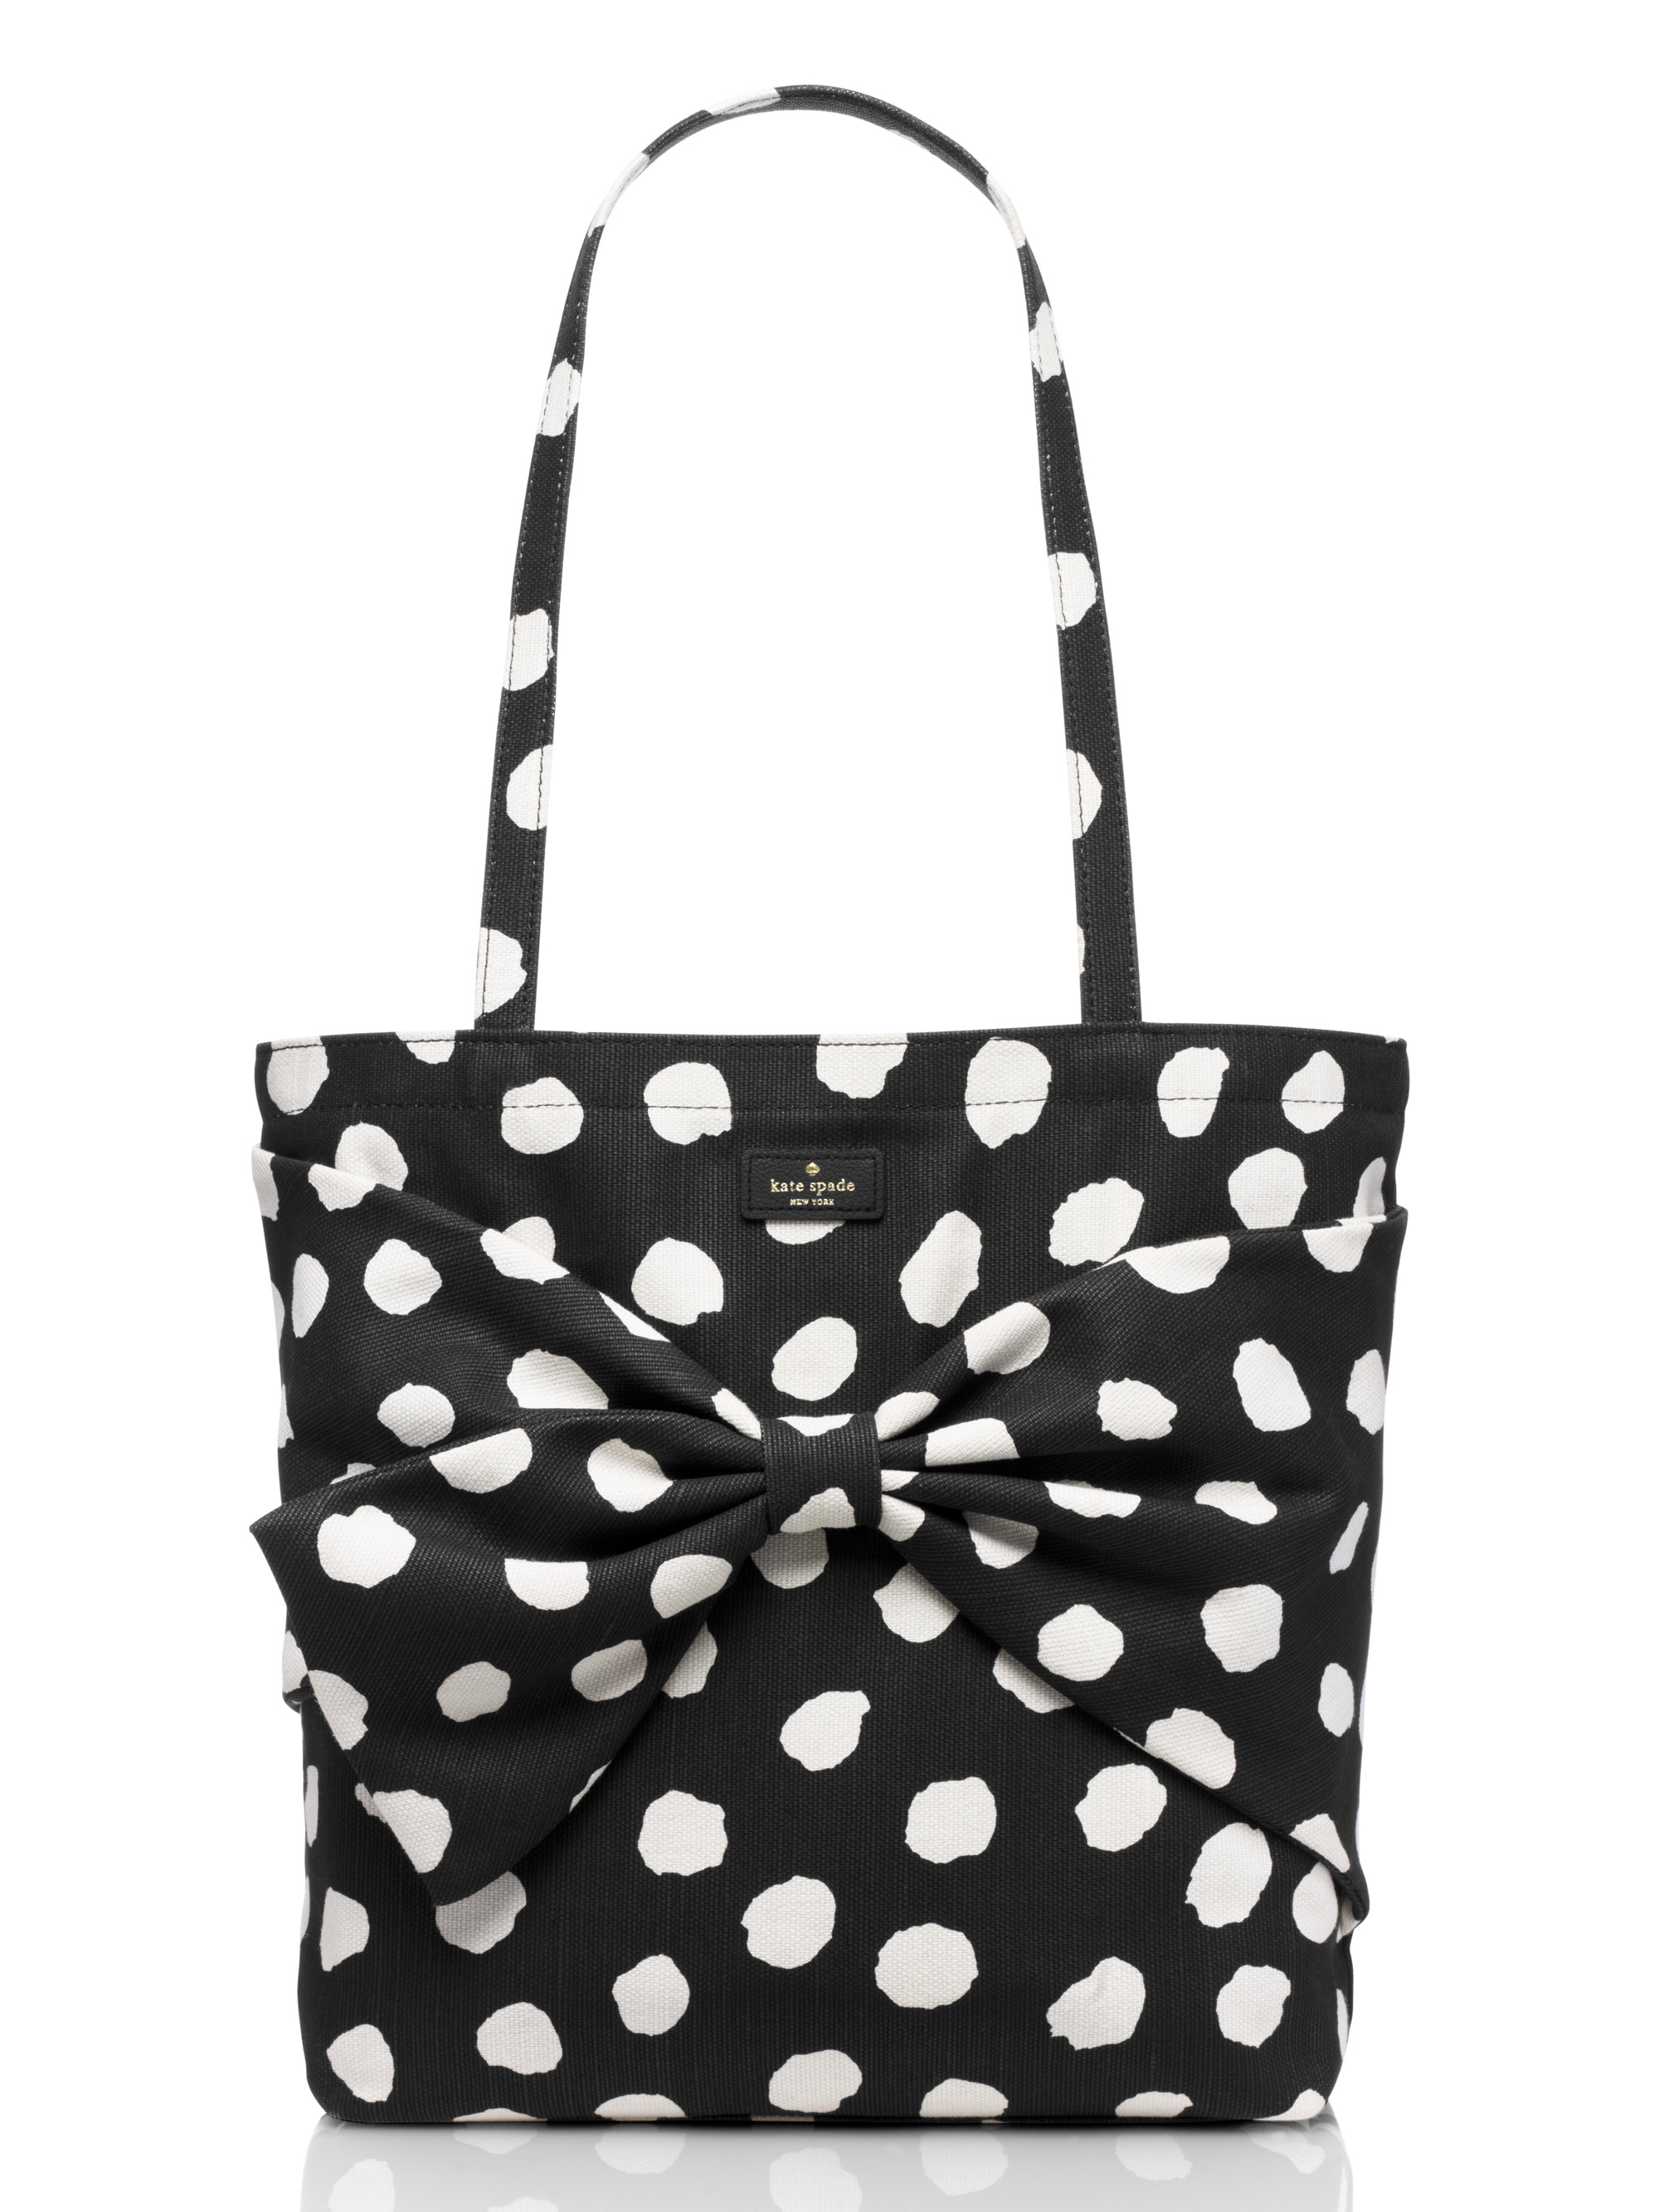 Lyst - Kate Spade New York On Purpose Canvas Tote in White